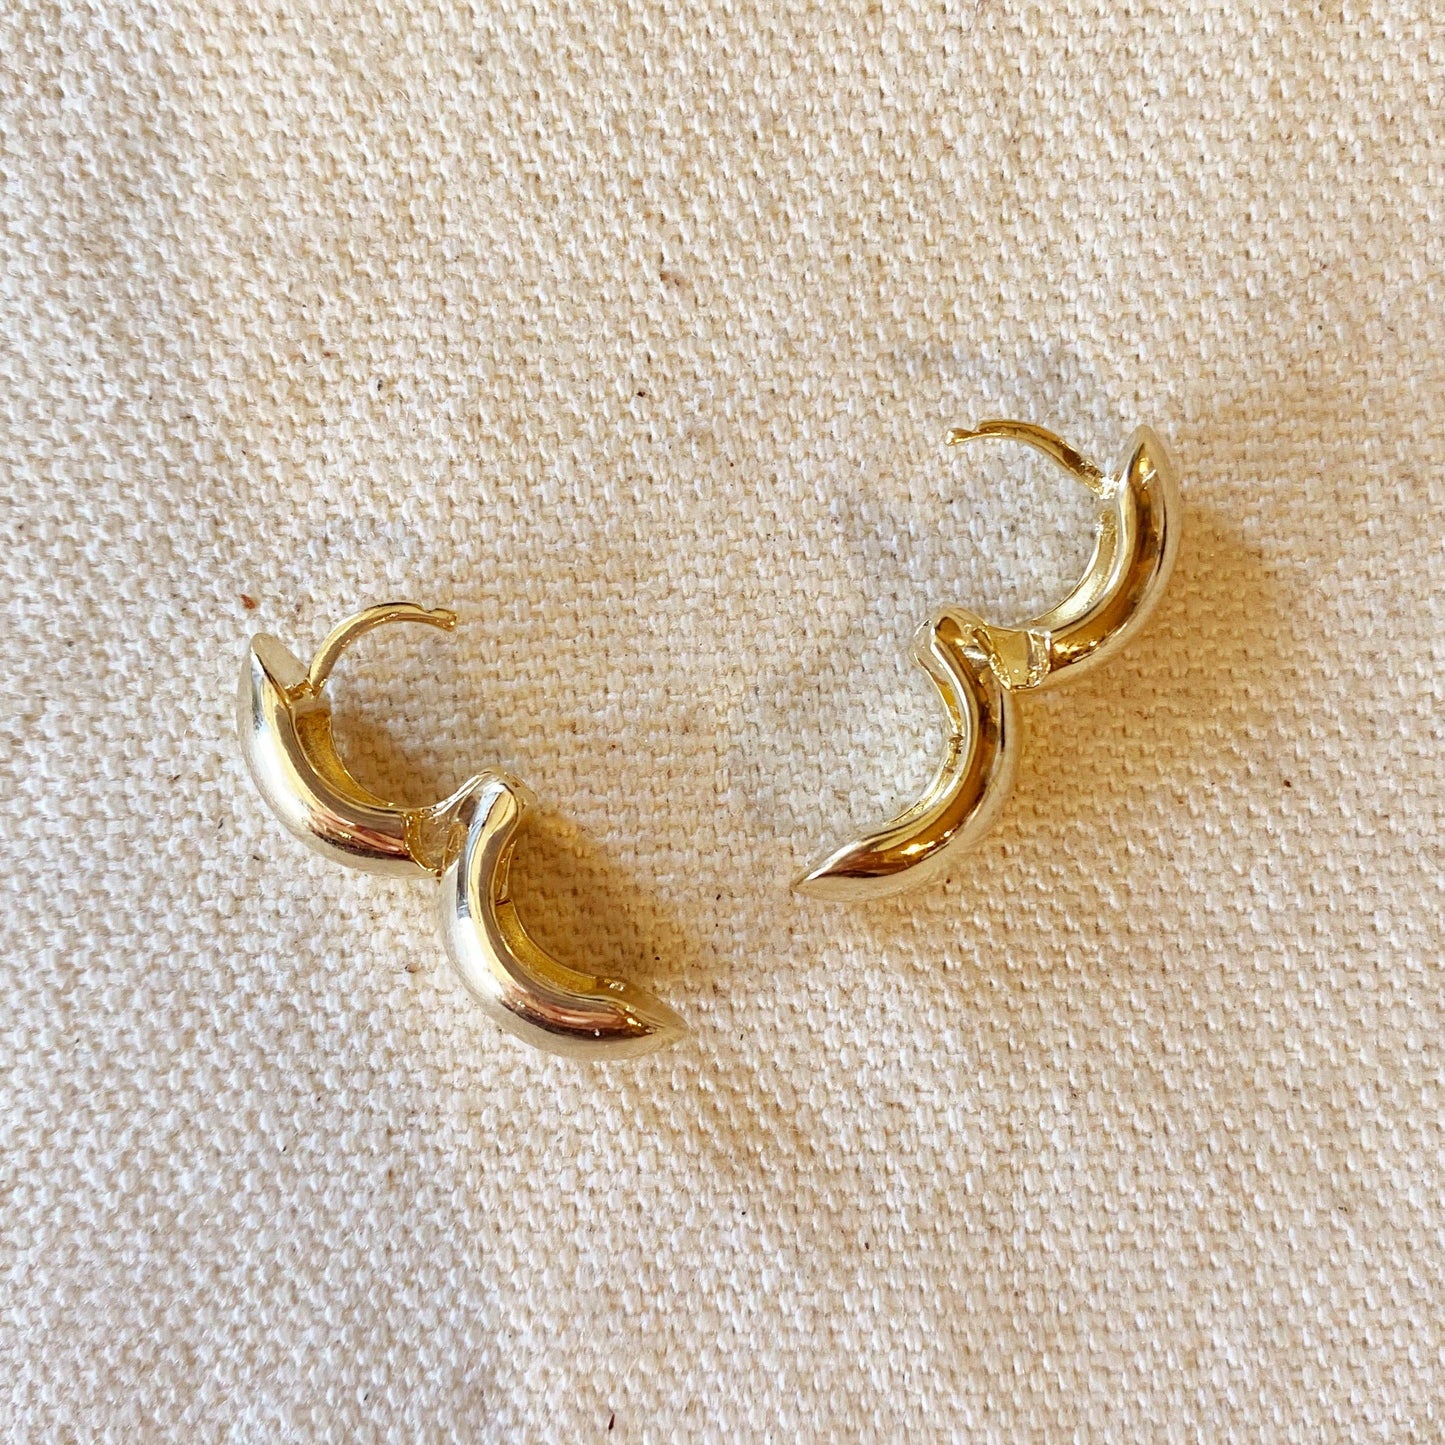 18k Gold Filled Rounded Chunky Clicker Hoop Earrings